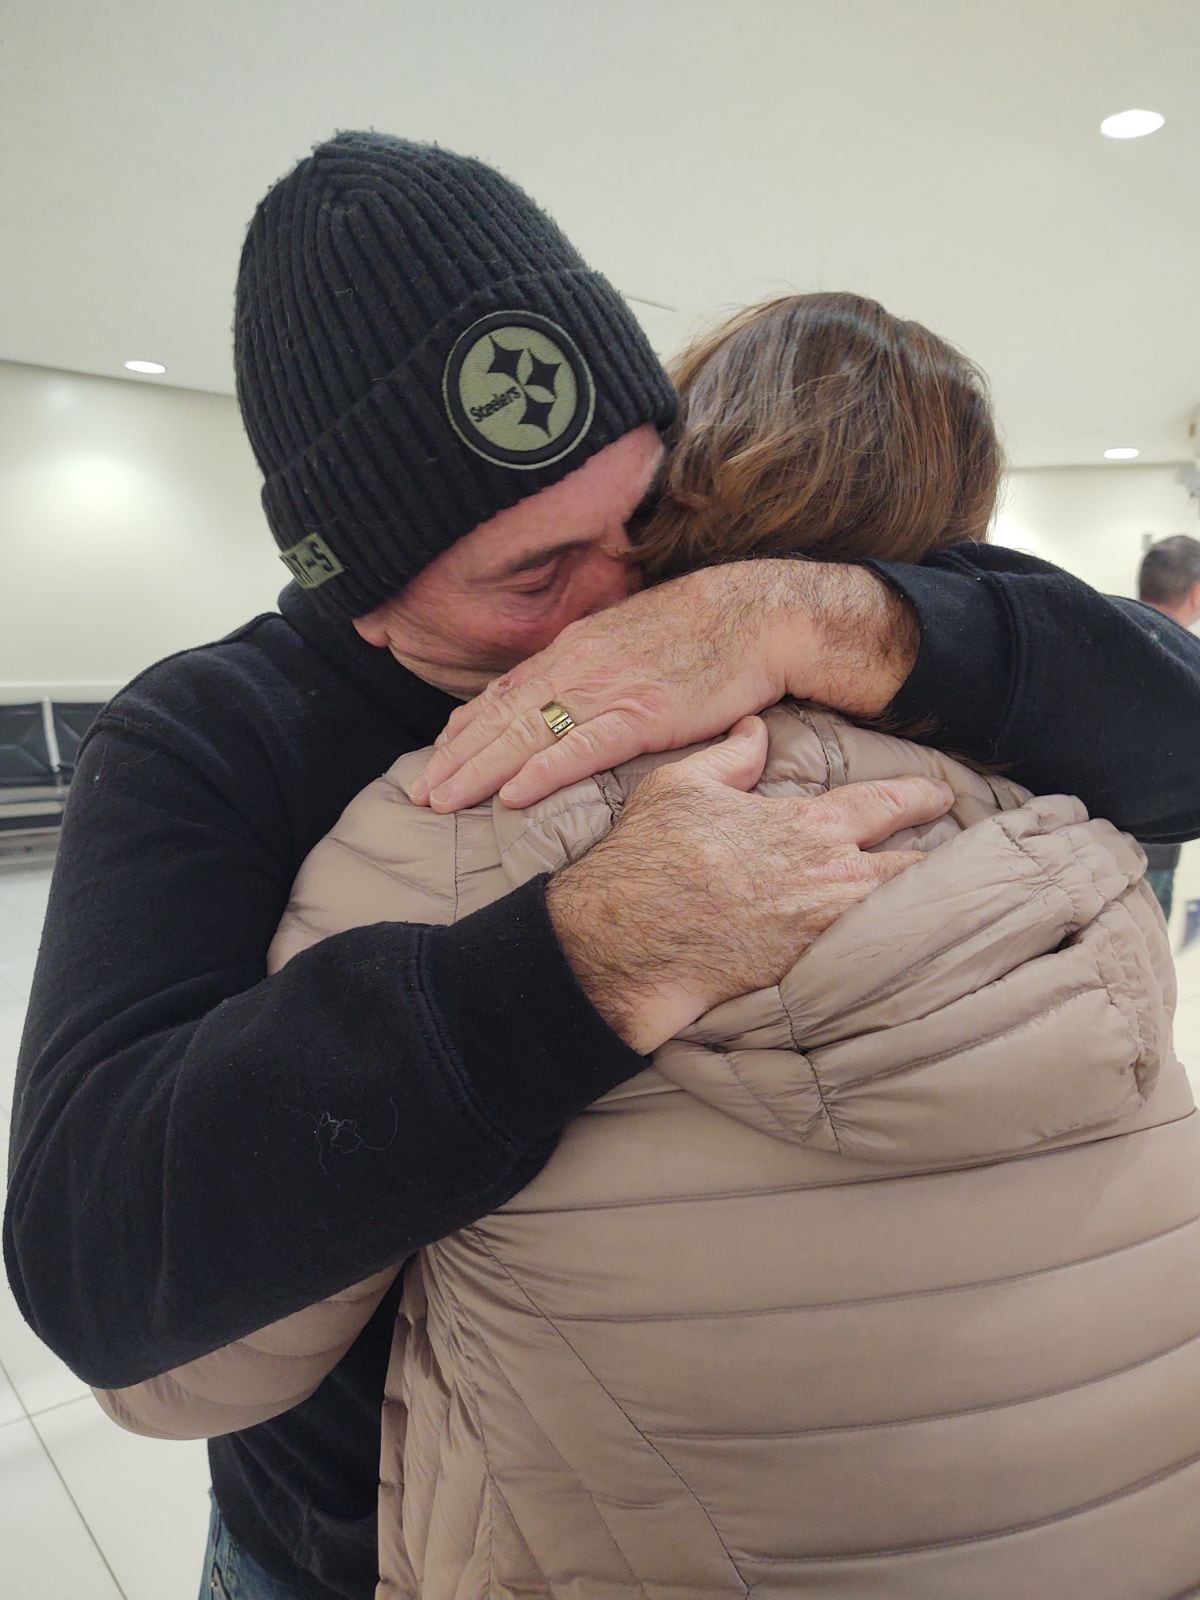 Separated before birth, Utica woman now reunited with brother